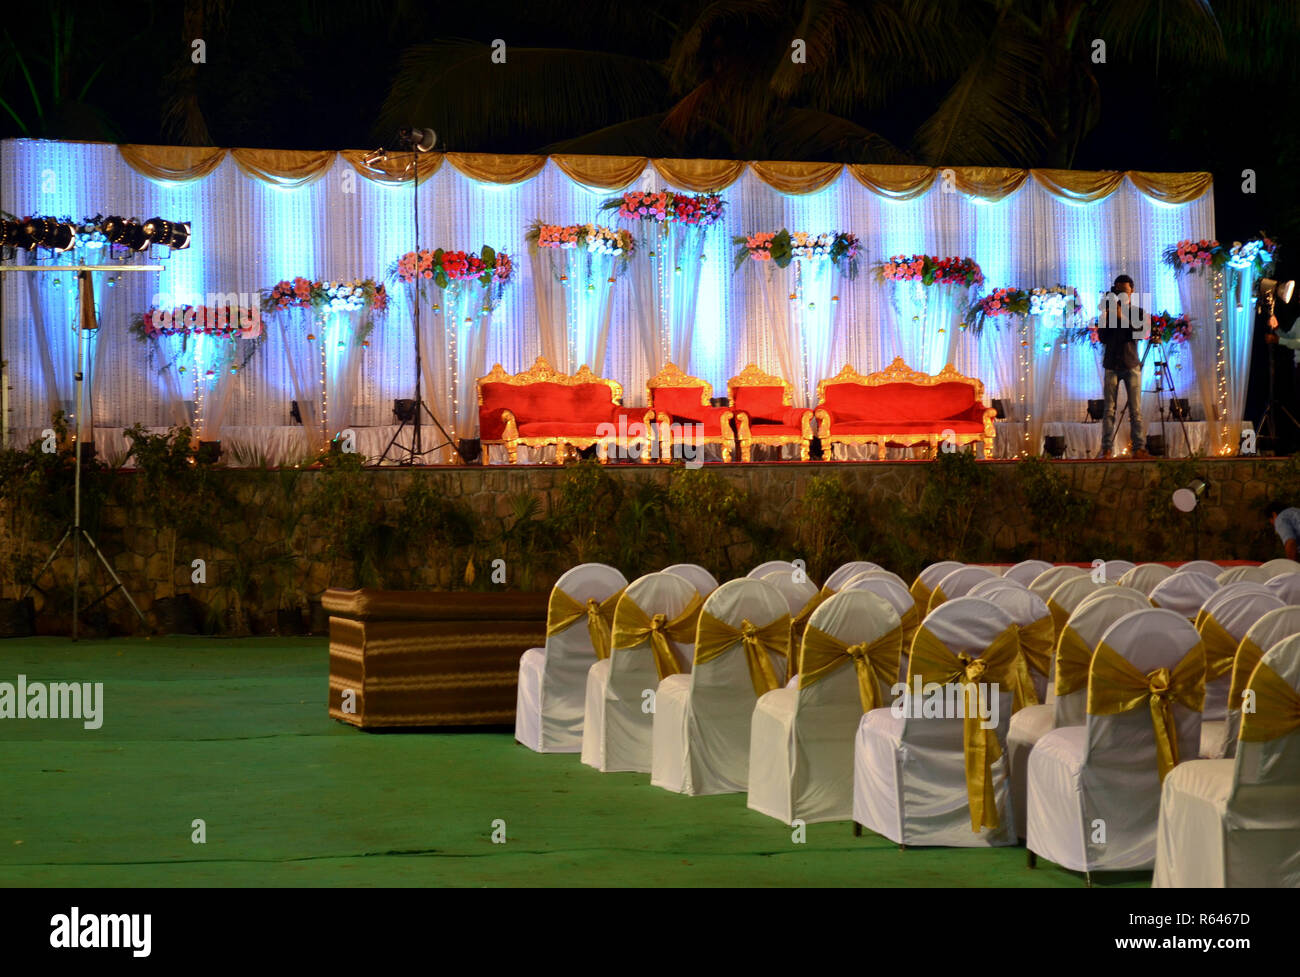 Big Indian fat wedding stage setup with chairs for the guests facing the stage for the bride and groom in a farmhouse in Delhi, India. Stock Photo